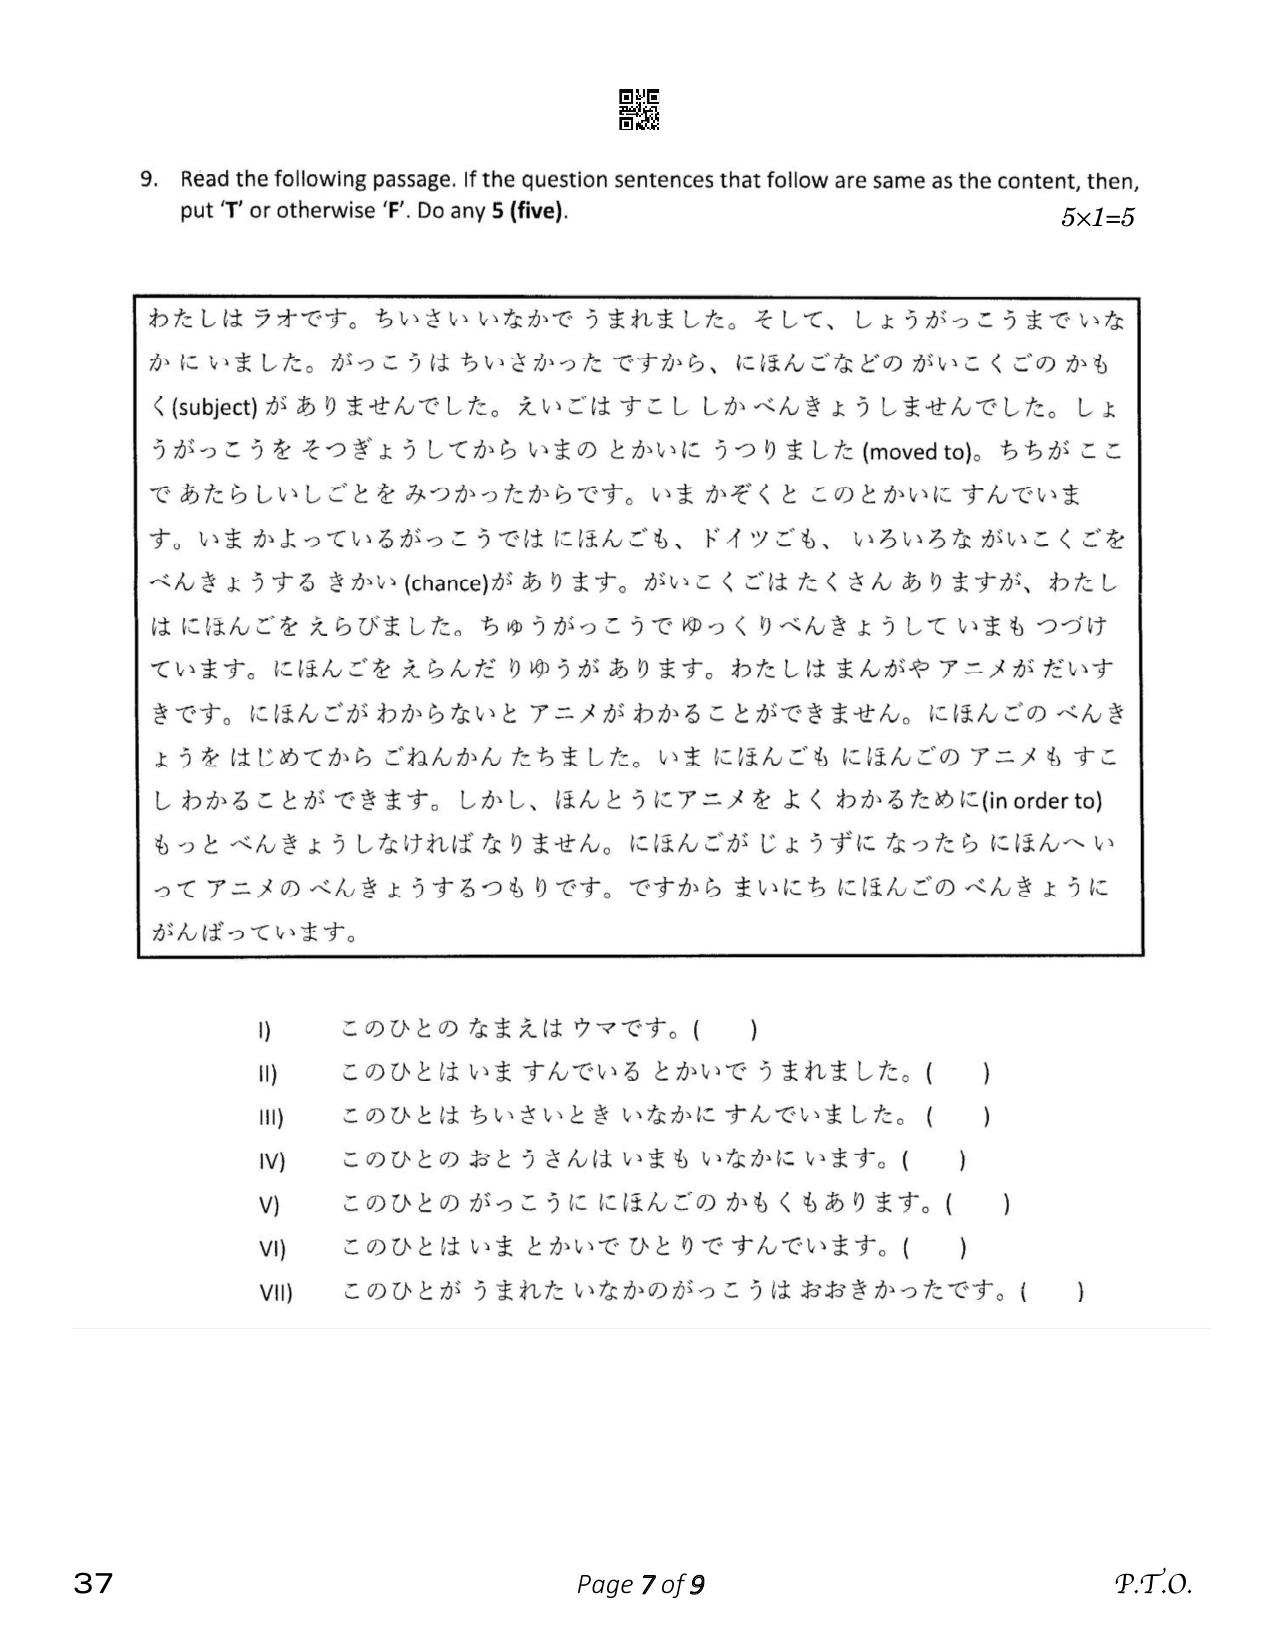 CBSE Class 12 Japanese (Compartment) 2023 Question Paper - Page 7